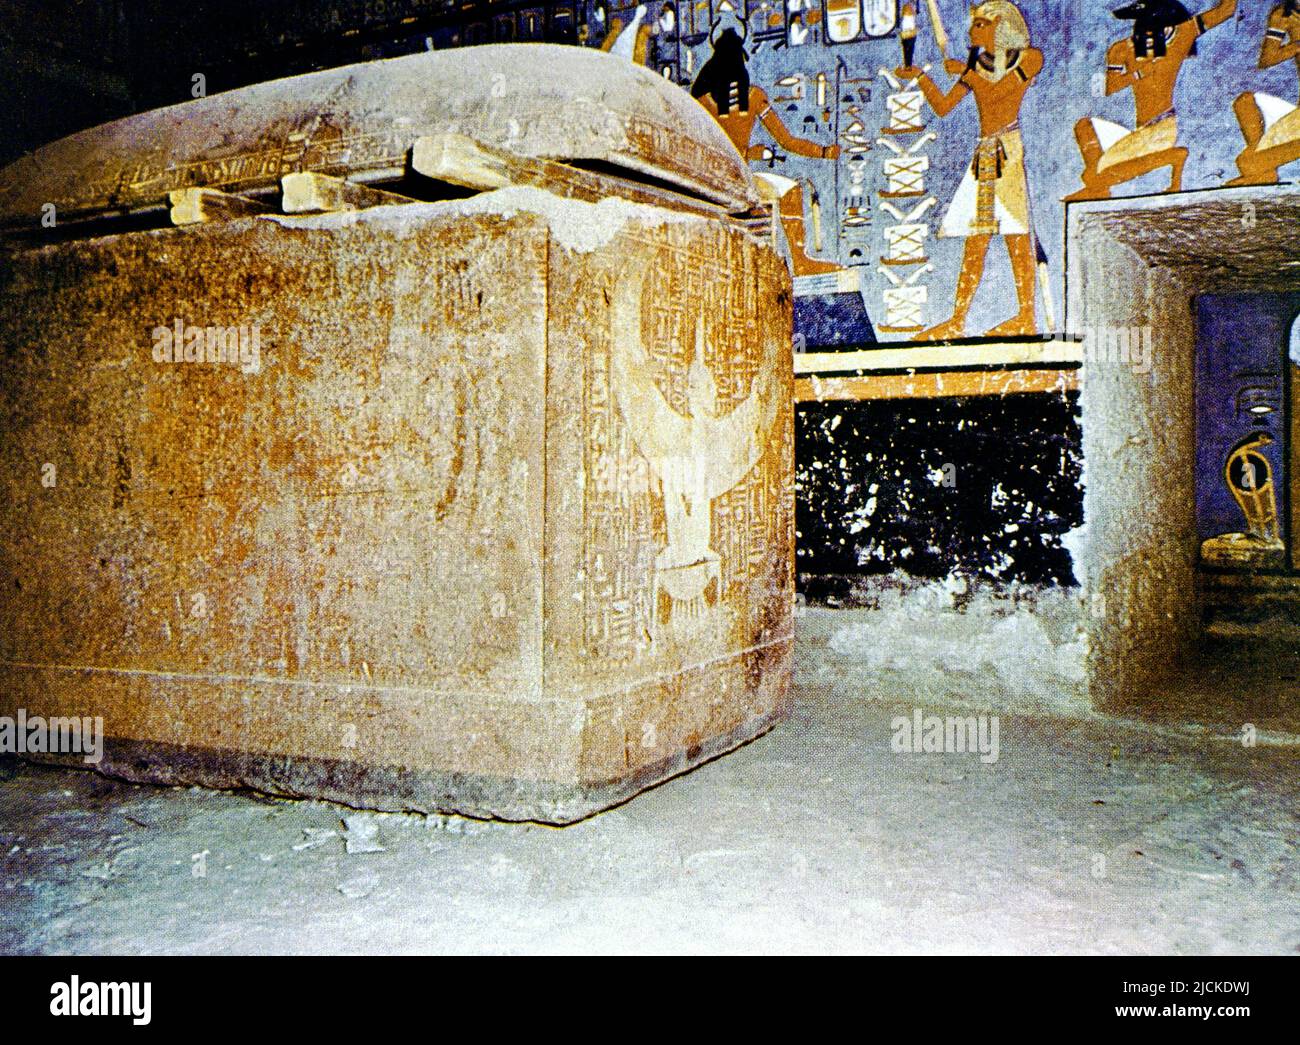 Luxor Egypt Valley of the Kings Rameses I Sarcophagus made of Red Quartzite in Tomb Decorated with Scenes from The Book of The Dead Stock Photo